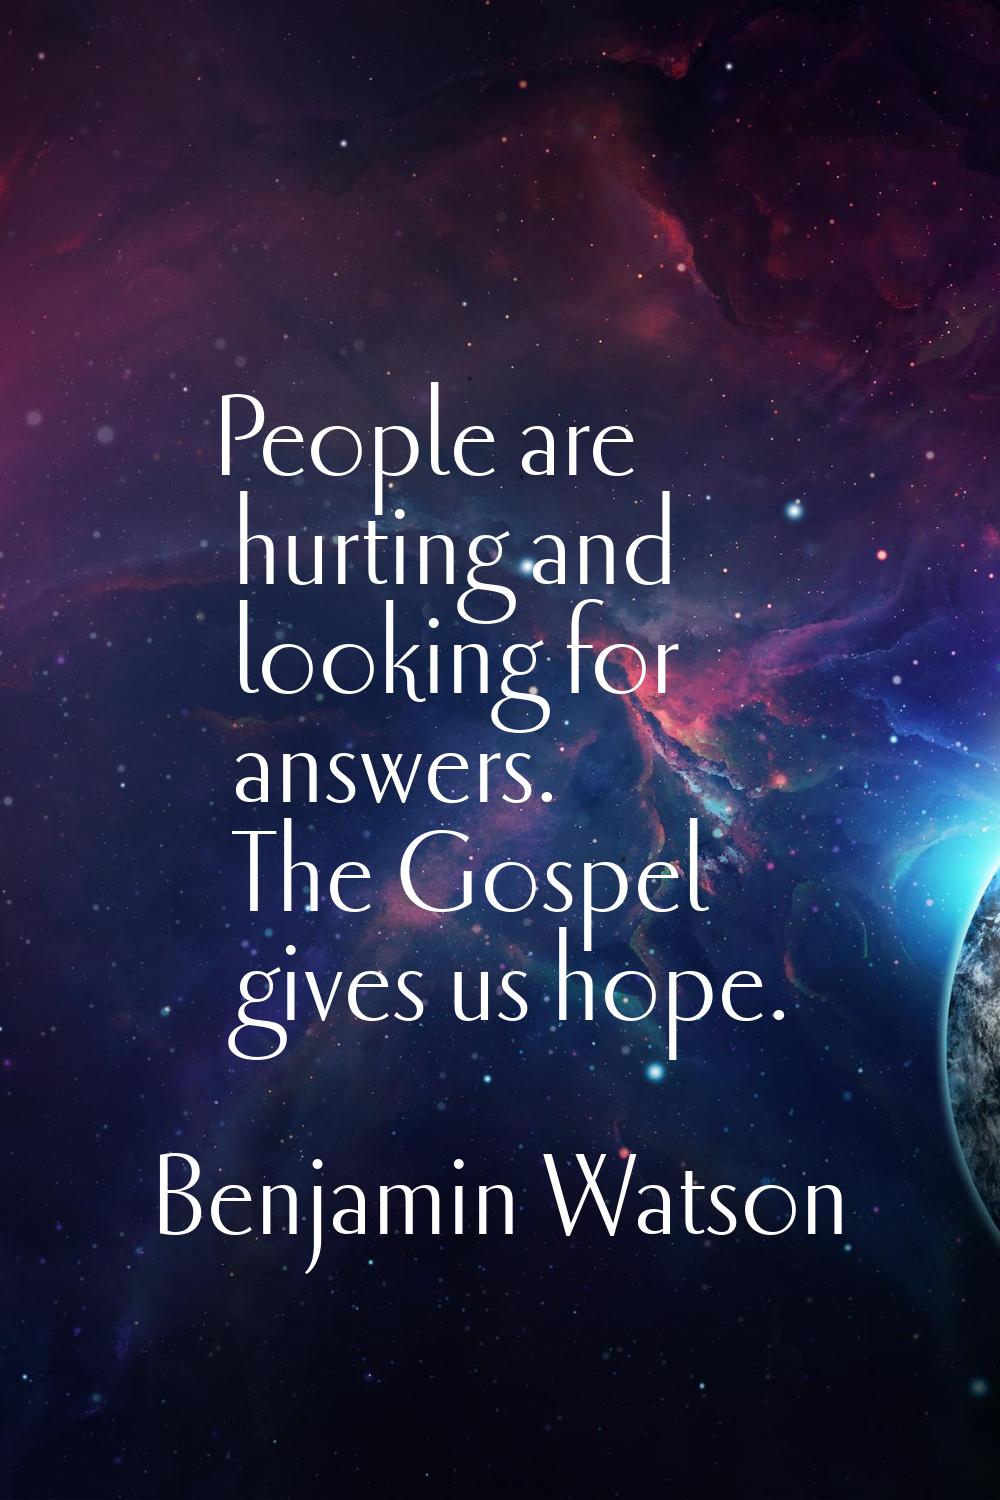 People are hurting and looking for answers. The Gospel gives us hope.